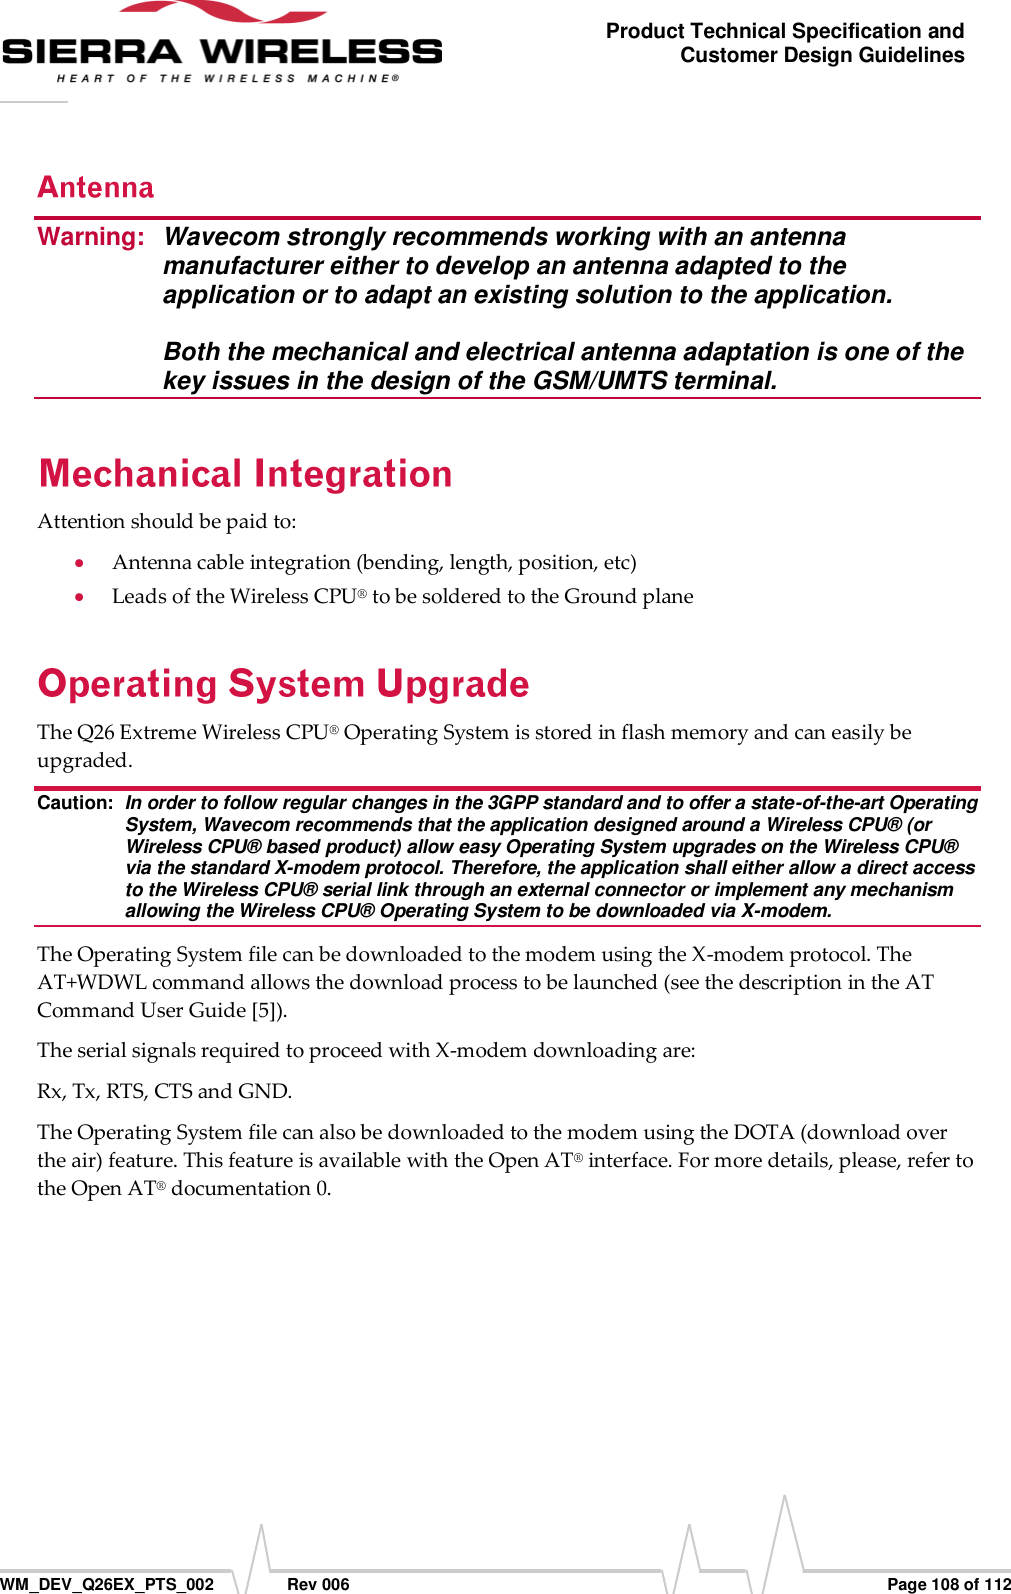      WM_DEV_Q26EX_PTS_002  Rev 006  Page 108 of 112 Product Technical Specification and Customer Design Guidelines Warning:  Wavecom strongly recommends working with an antenna manufacturer either to develop an antenna adapted to the application or to adapt an existing solution to the application.   Both the mechanical and electrical antenna adaptation is one of the key issues in the design of the GSM/UMTS terminal. Attention should be paid to:  Antenna cable integration (bending, length, position, etc)  Leads of the Wireless CPU® to be soldered to the Ground plane The Q26 Extreme Wireless CPU® Operating System is stored in flash memory and can easily be upgraded. Caution:  In order to follow regular changes in the 3GPP standard and to offer a state-of-the-art Operating System, Wavecom recommends that the application designed around a Wireless CPU® (or Wireless CPU® based product) allow easy Operating System upgrades on the Wireless CPU® via the standard X-modem protocol. Therefore, the application shall either allow a direct access to the Wireless CPU® serial link through an external connector or implement any mechanism allowing the Wireless CPU® Operating System to be downloaded via X-modem. The Operating System file can be downloaded to the modem using the X-modem protocol. The AT+WDWL command allows the download process to be launched (see the description in the AT Command User Guide [5]). The serial signals required to proceed with X-modem downloading are: Rx, Tx, RTS, CTS and GND. The Operating System file can also be downloaded to the modem using the DOTA (download over the air) feature. This feature is available with the Open AT® interface. For more details, please, refer to the Open AT® documentation 0. 